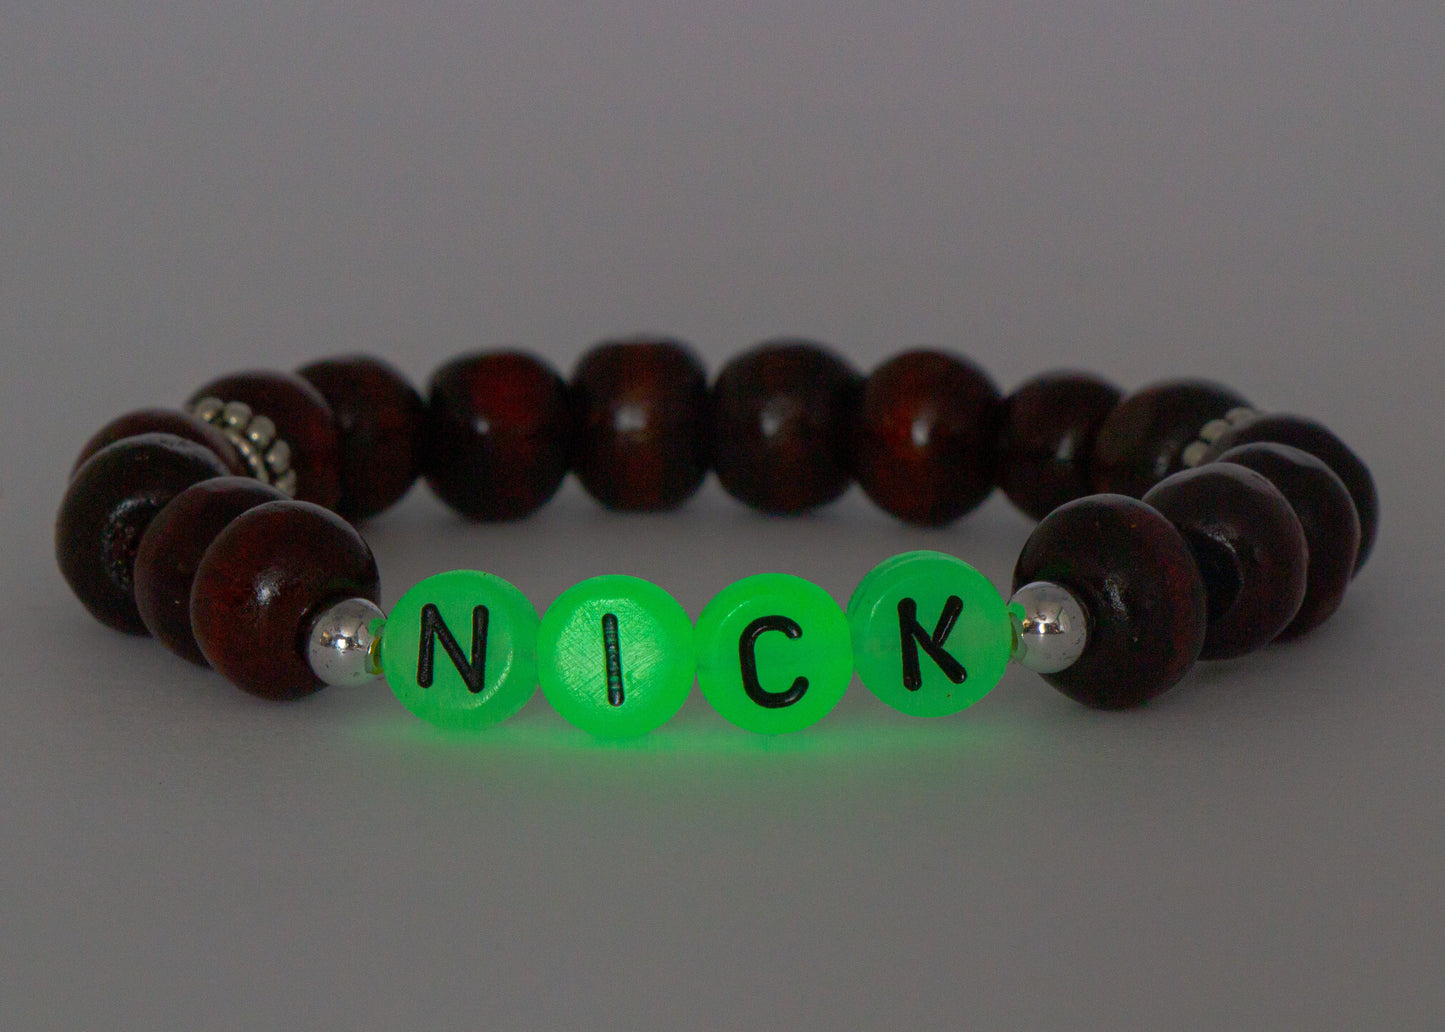 Boys bracelet translucent / personalized wooden stretch elastic cord name jewelry